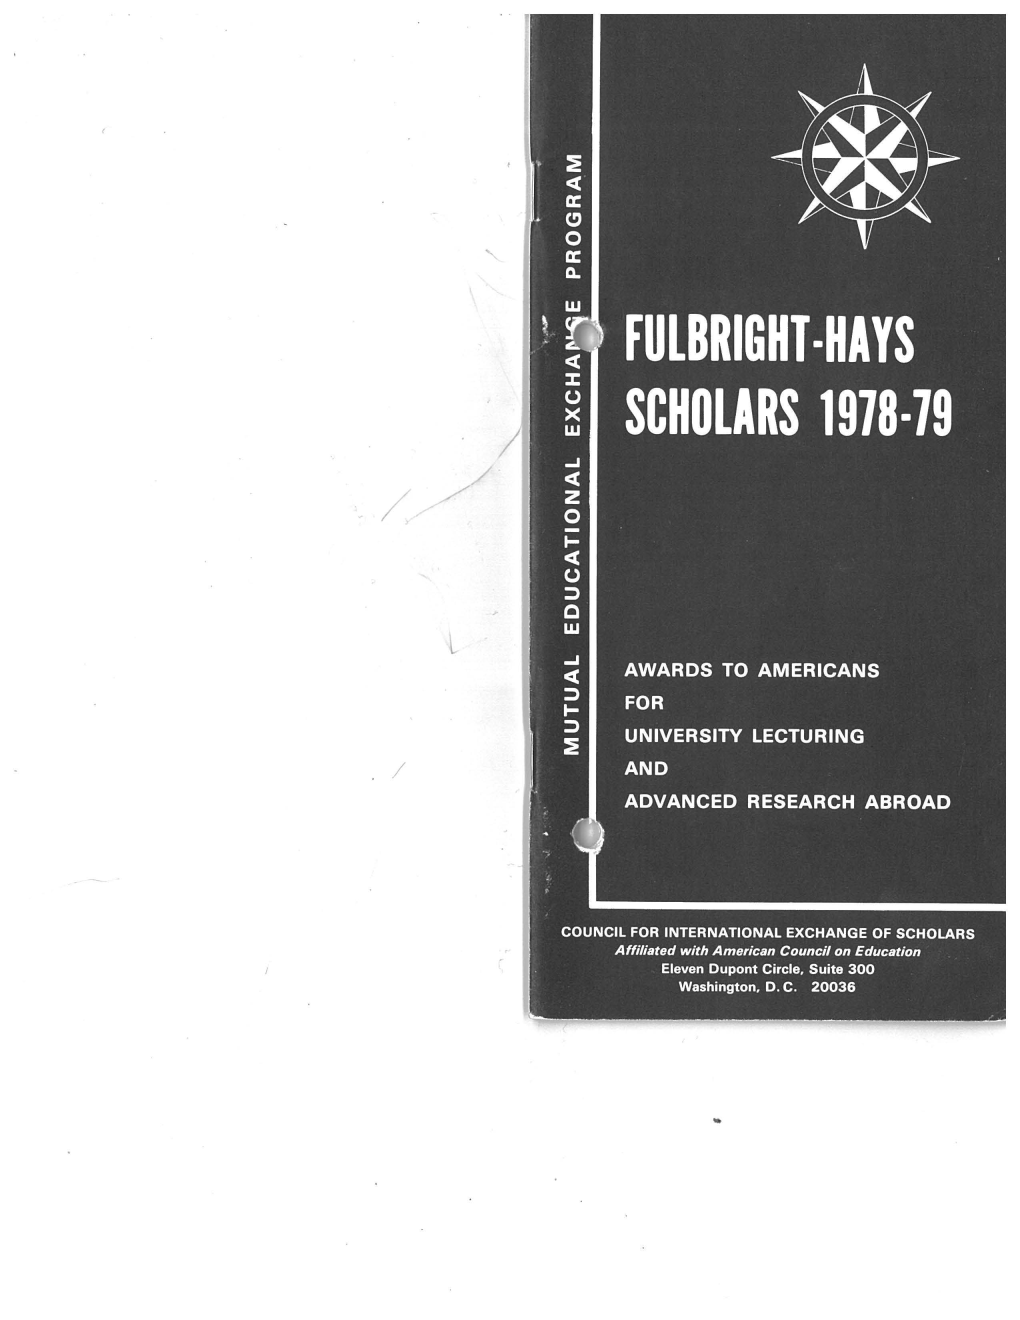 Fulbright Scholars Directory